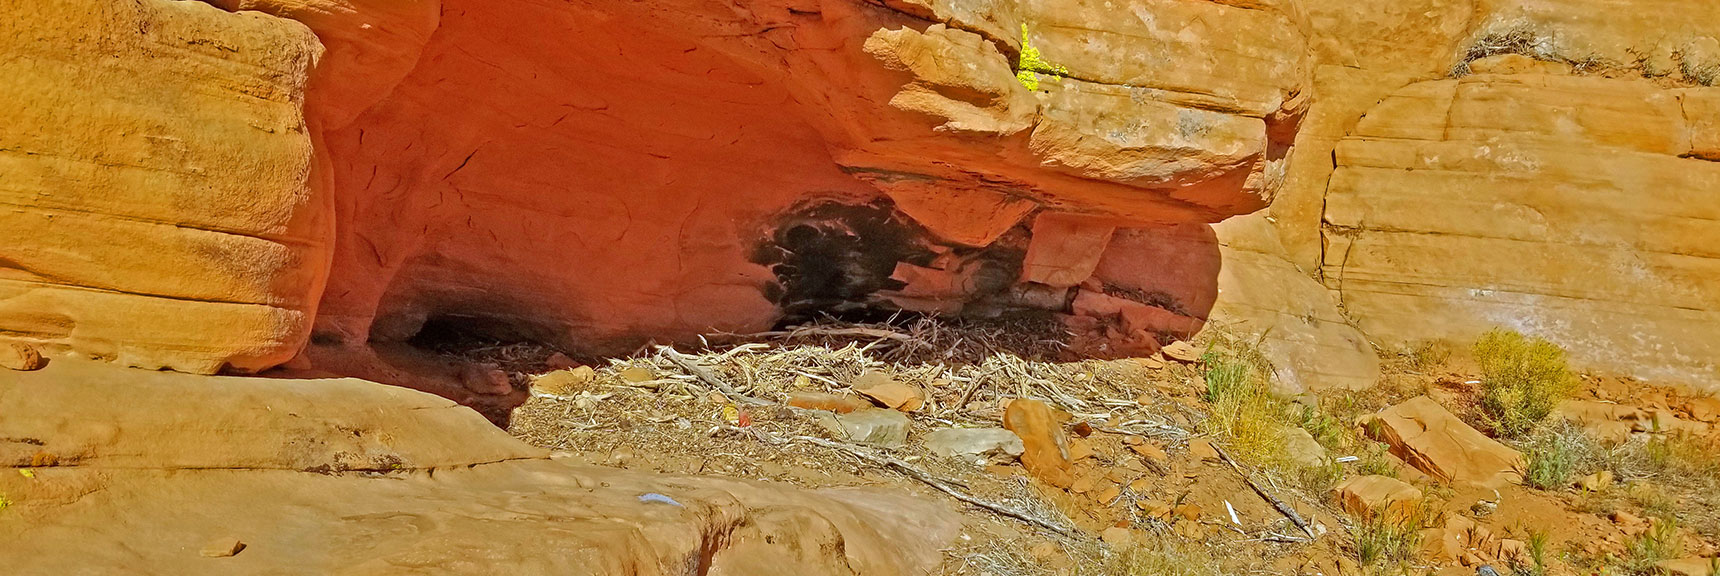 Small Animal Burrow Marked by Debris At Entrance | Little Red Rock Las Vegas, Nevada, Near La Madre Mountains Wilderness